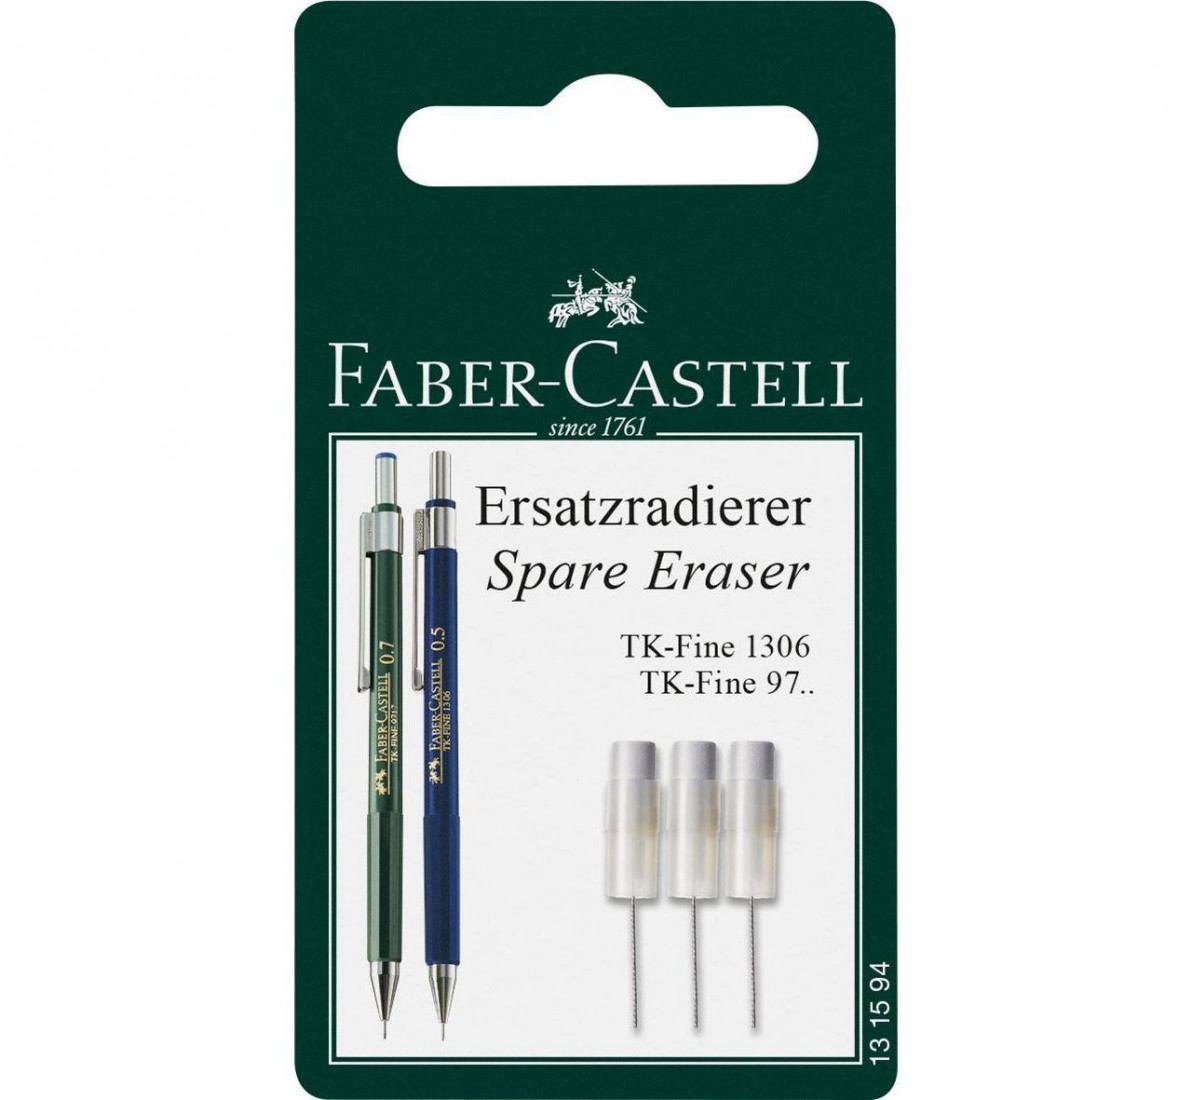 Faber Castell TK-Fine spare erasers for mechanical pencil, set of 3, 131594